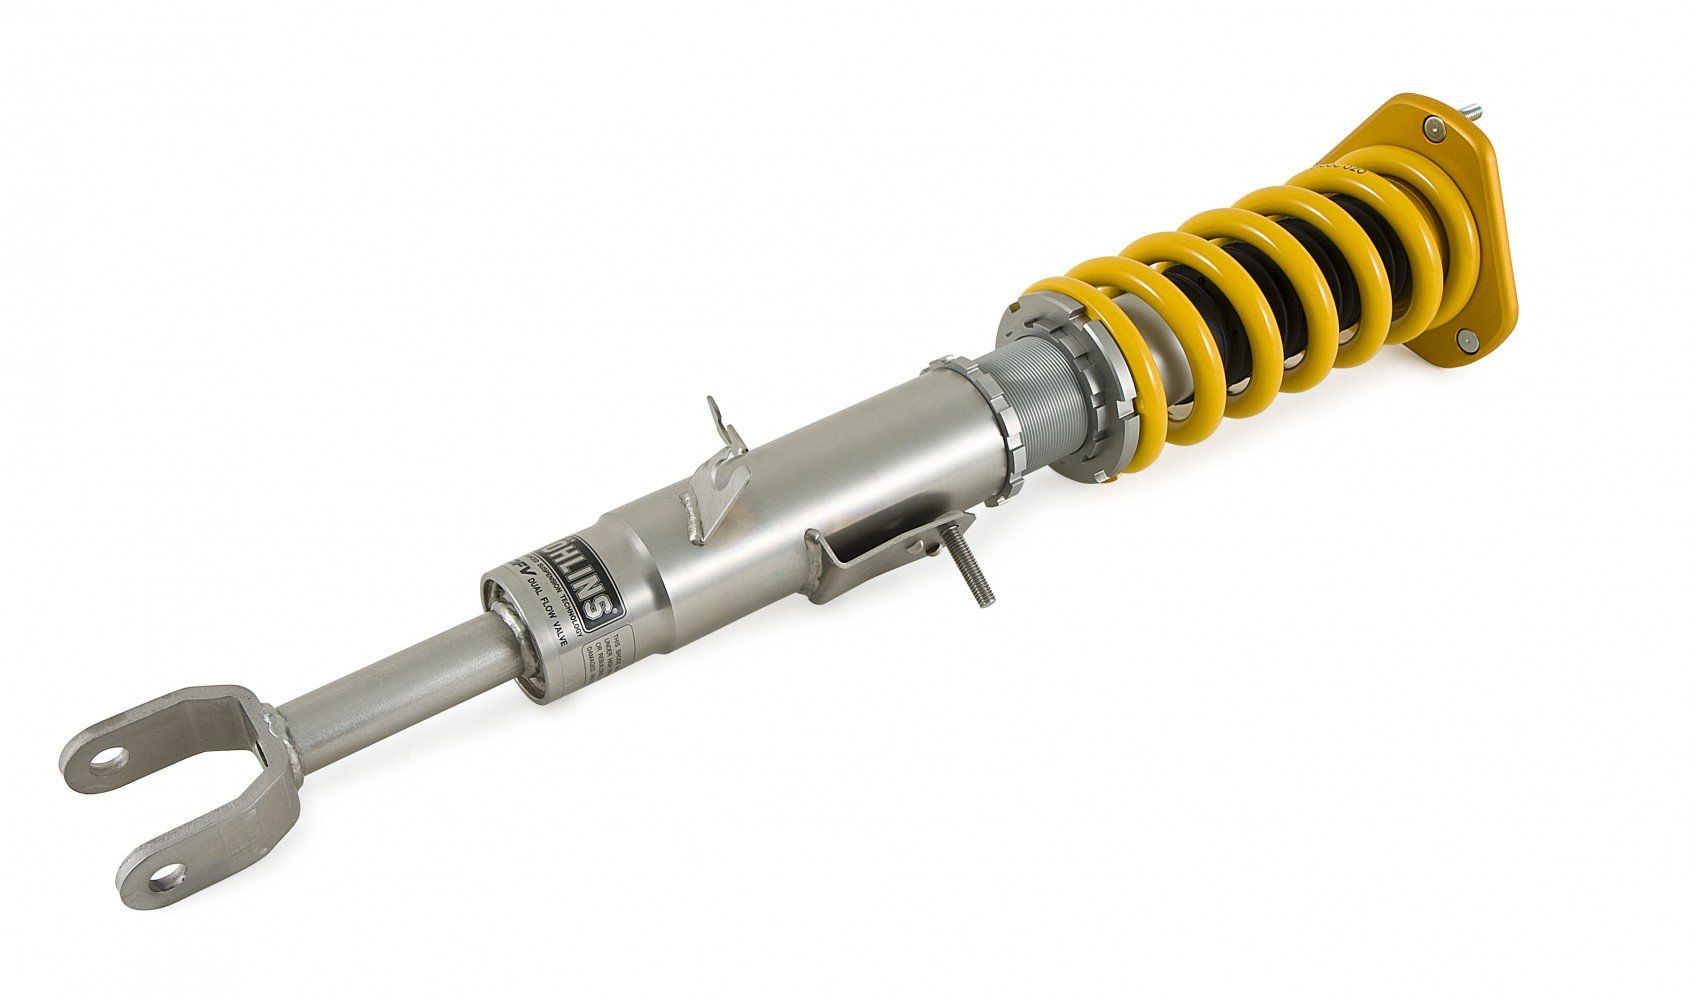 Ohlins Road & Track Coilover System - Nissan 350Z / Infiniti G35 RWD